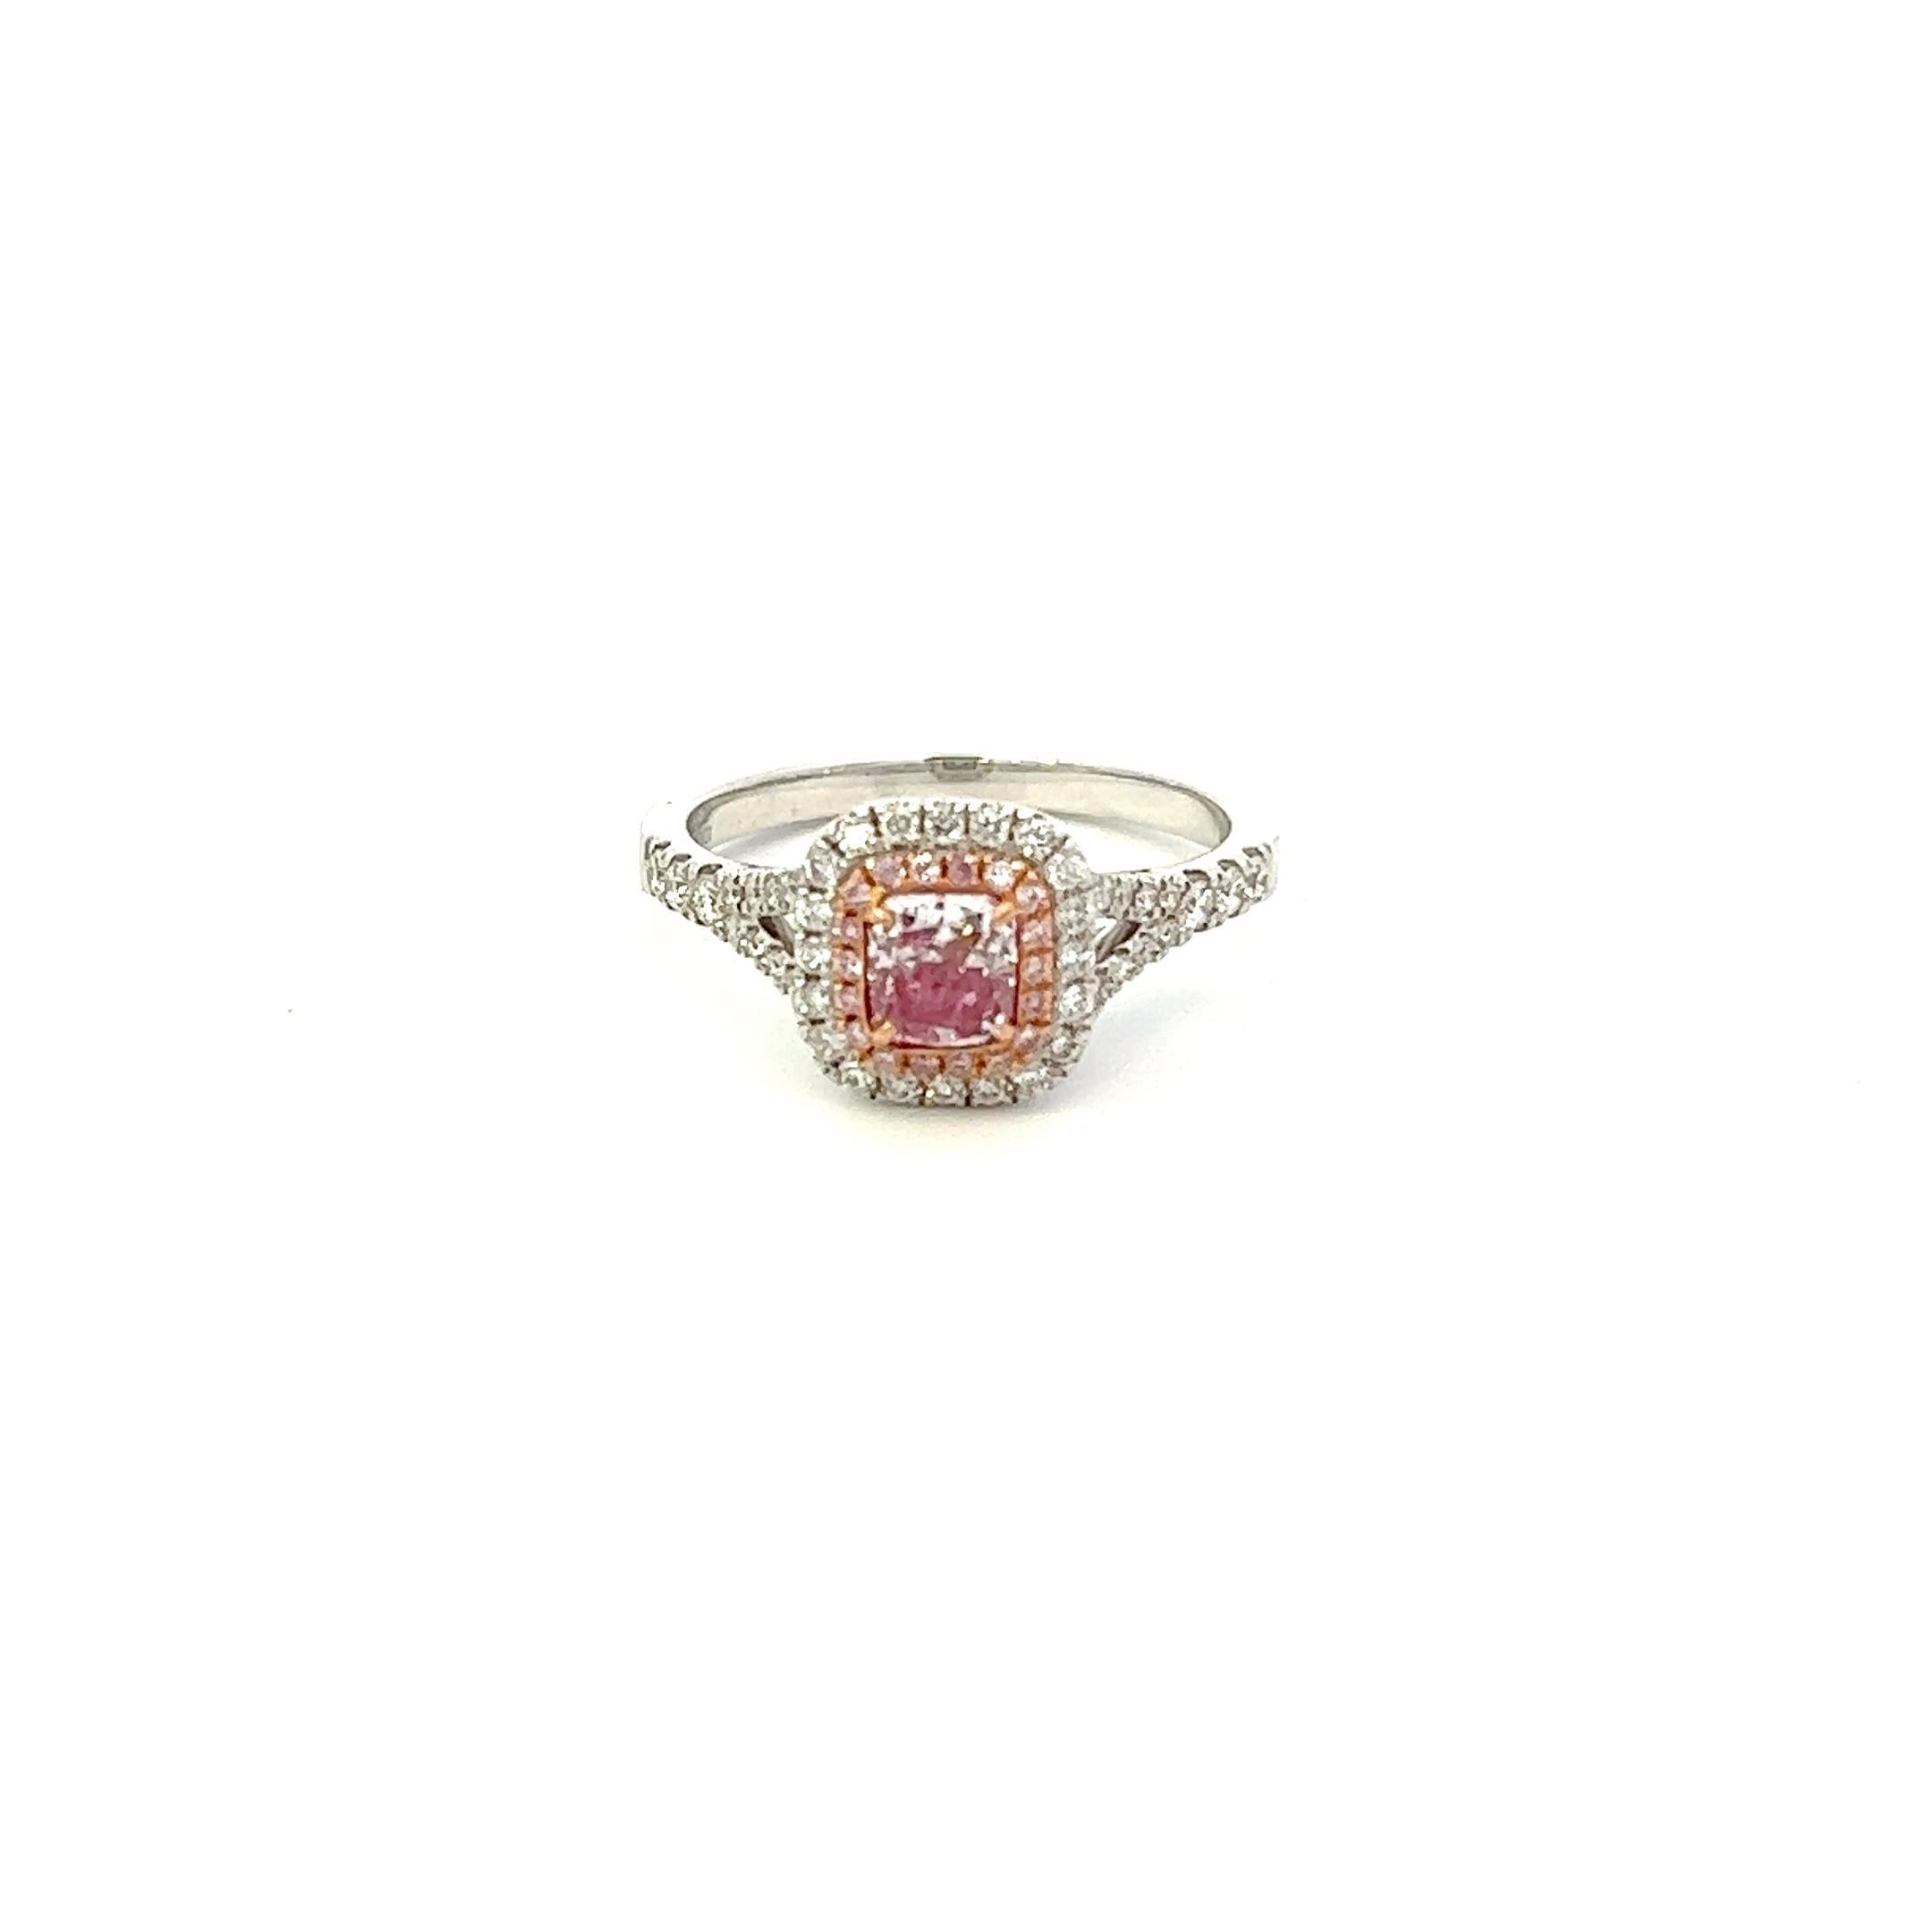 Center: 0.51ct Light Pink Rectangular I2 GIA #3395073411
Setting: 18k White Gold 0.35ctw White Diamonds

An extremely rare and stunning natural pink diamond center. Pink Diamonds account for less than 0.01% of all diamonds mined in the world! With